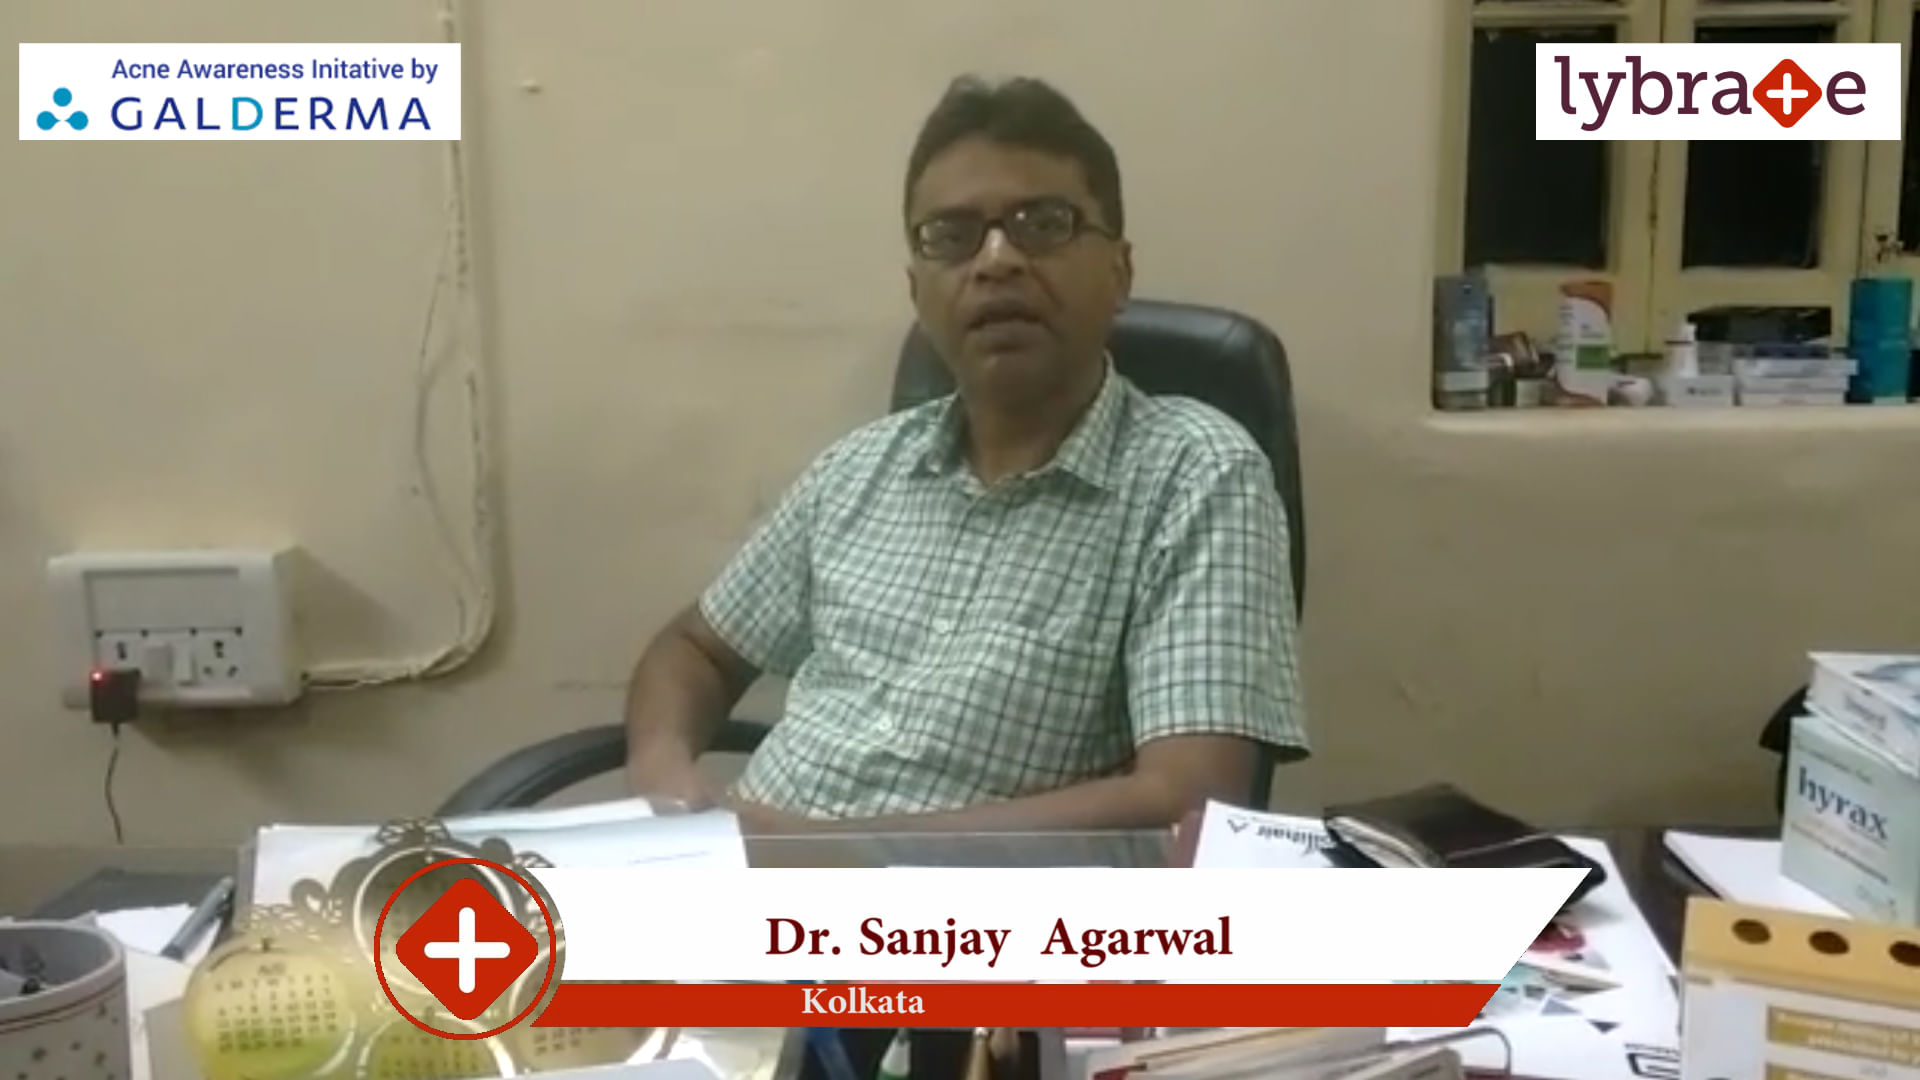 Lybrate | Dr. Sanjay  Agarwal speaks on IMPORTANCE OF TREATING ACNE EARLY